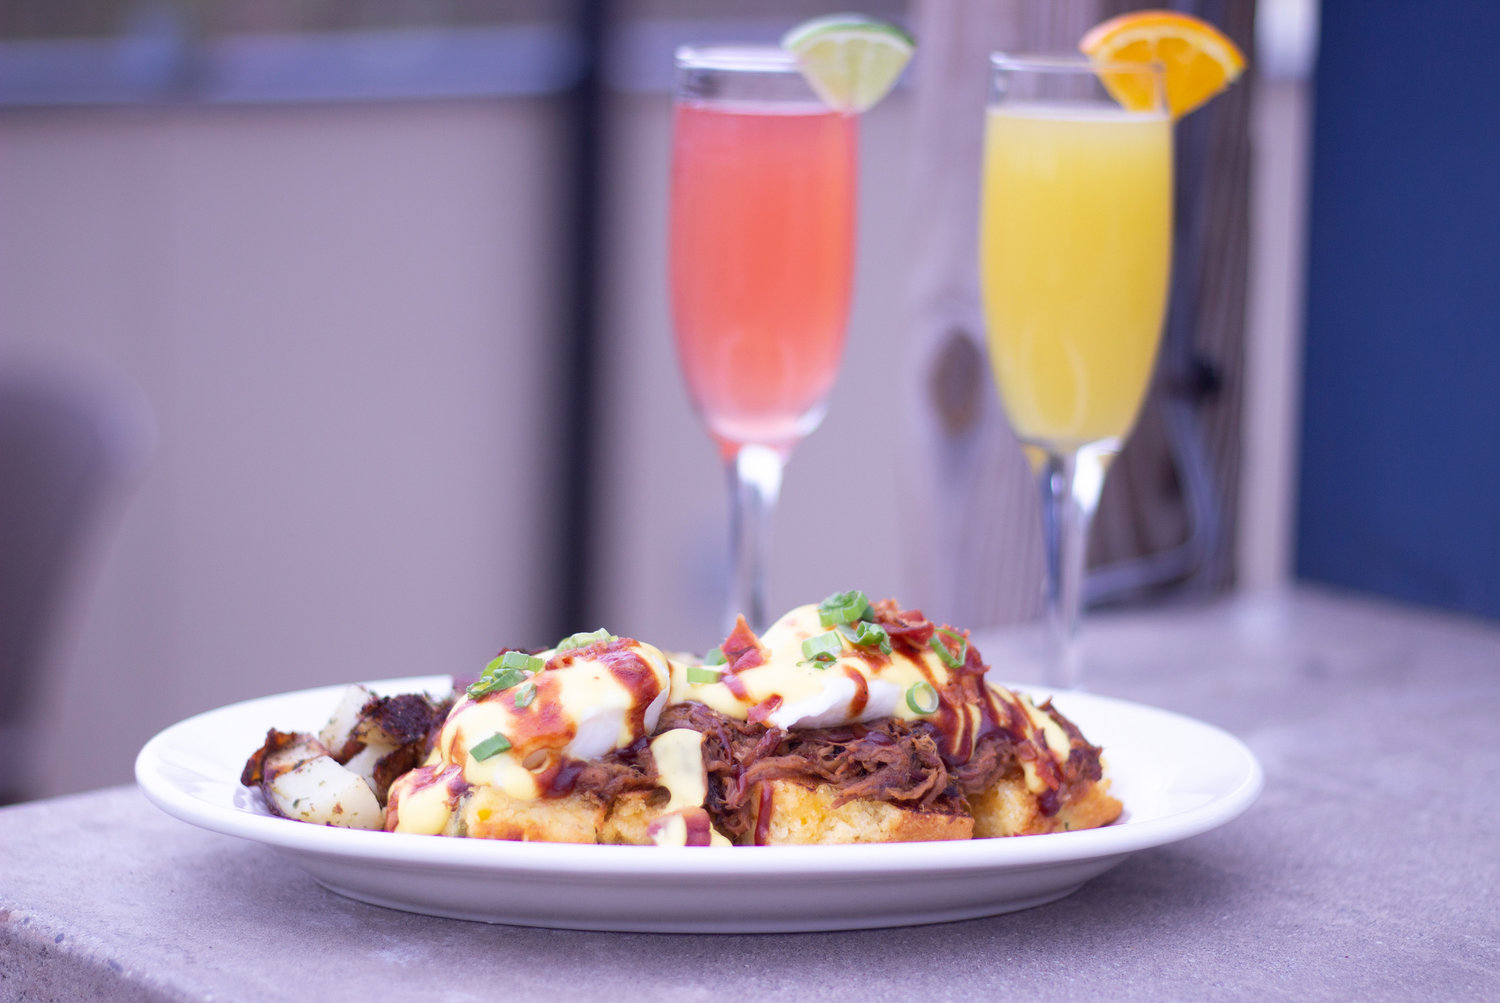 Mimosas and a Pulled Pork Benny